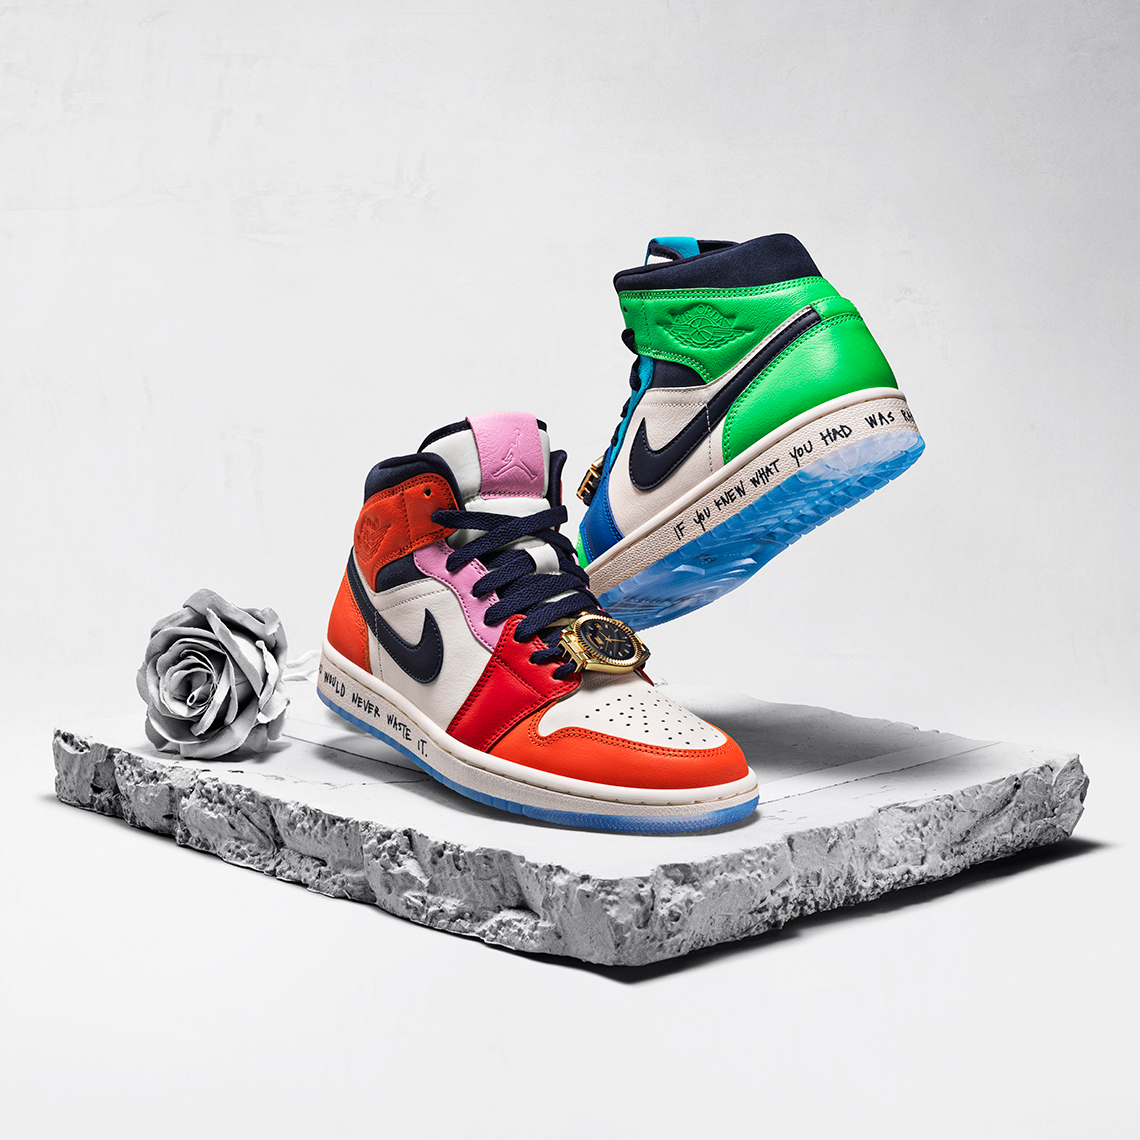 How Much Does The Air Jordan 1 Cost? | SneakerNews.com